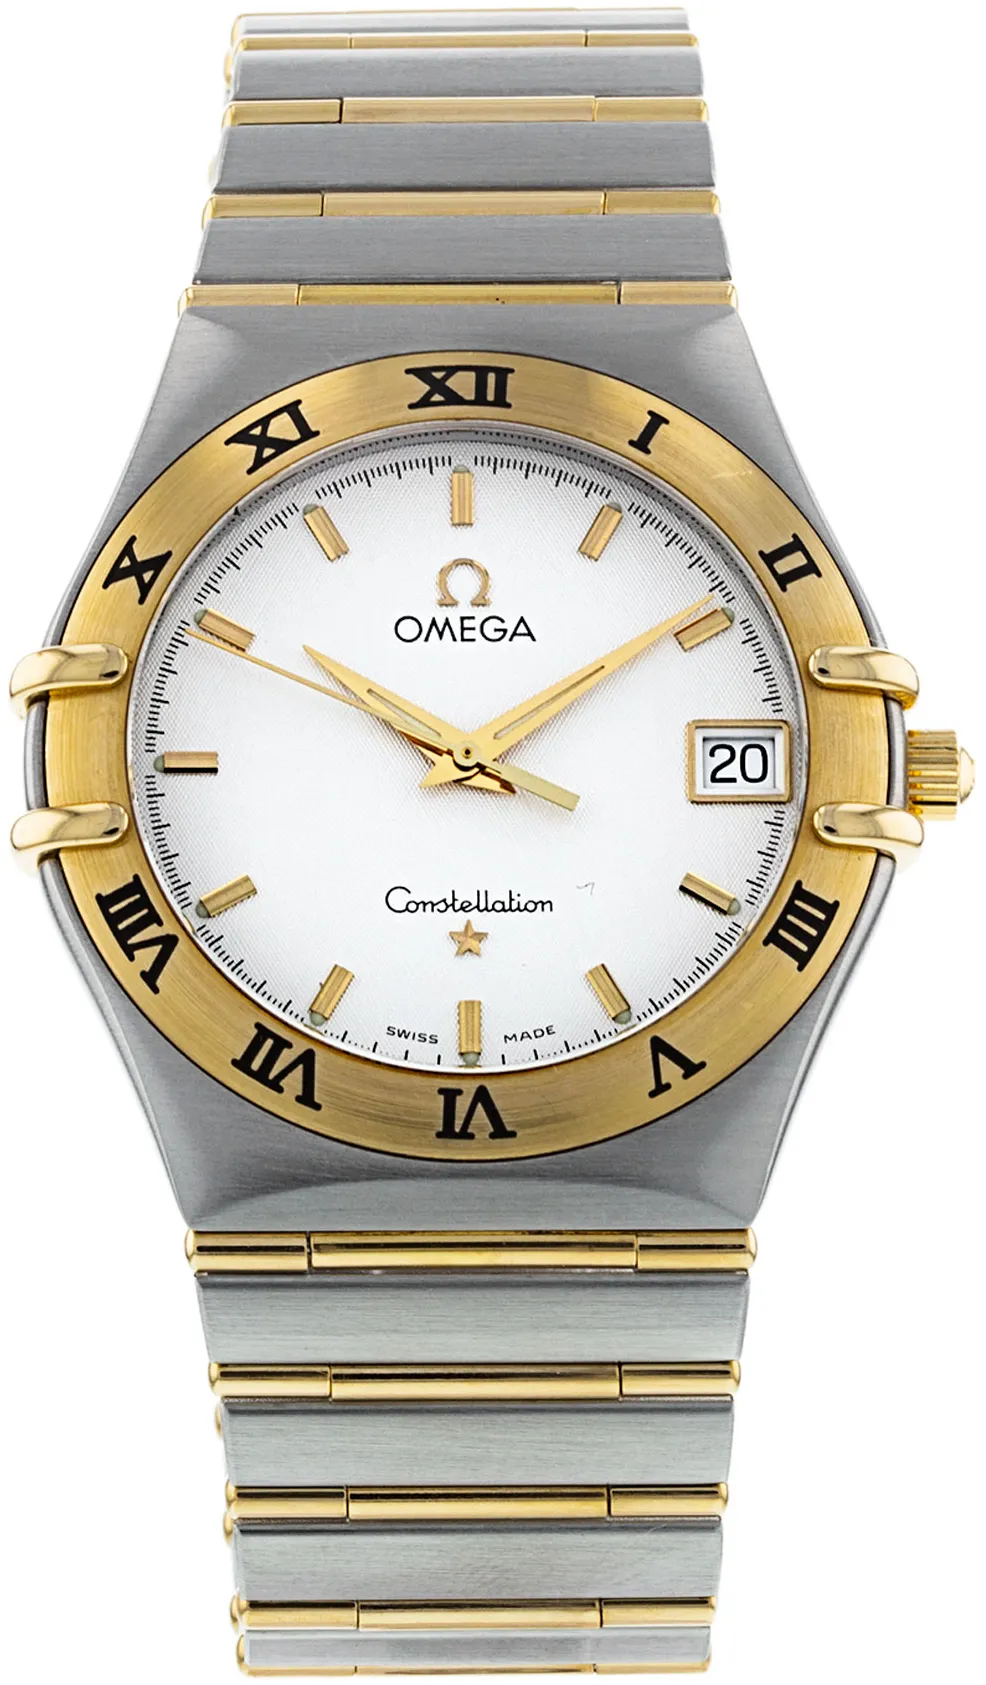 Omega Constellation Quartz 1212.30.00 33mm Yellow gold and stainless steel